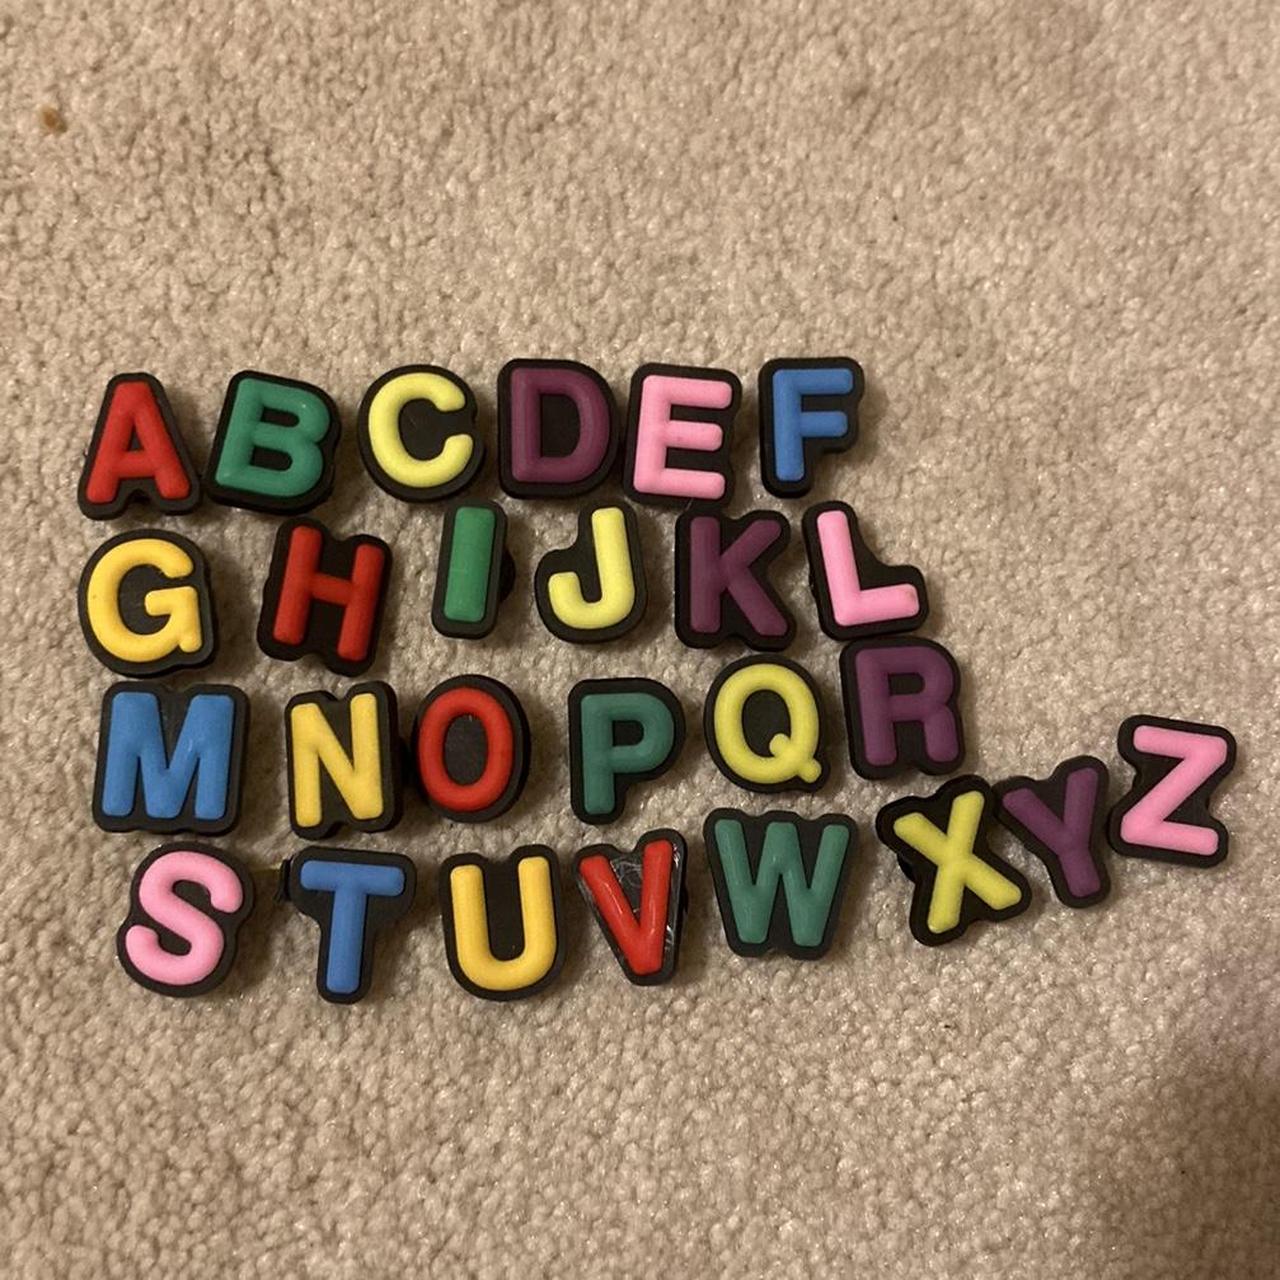 LETTER CROCS CHARMS, a-z letters and numbers